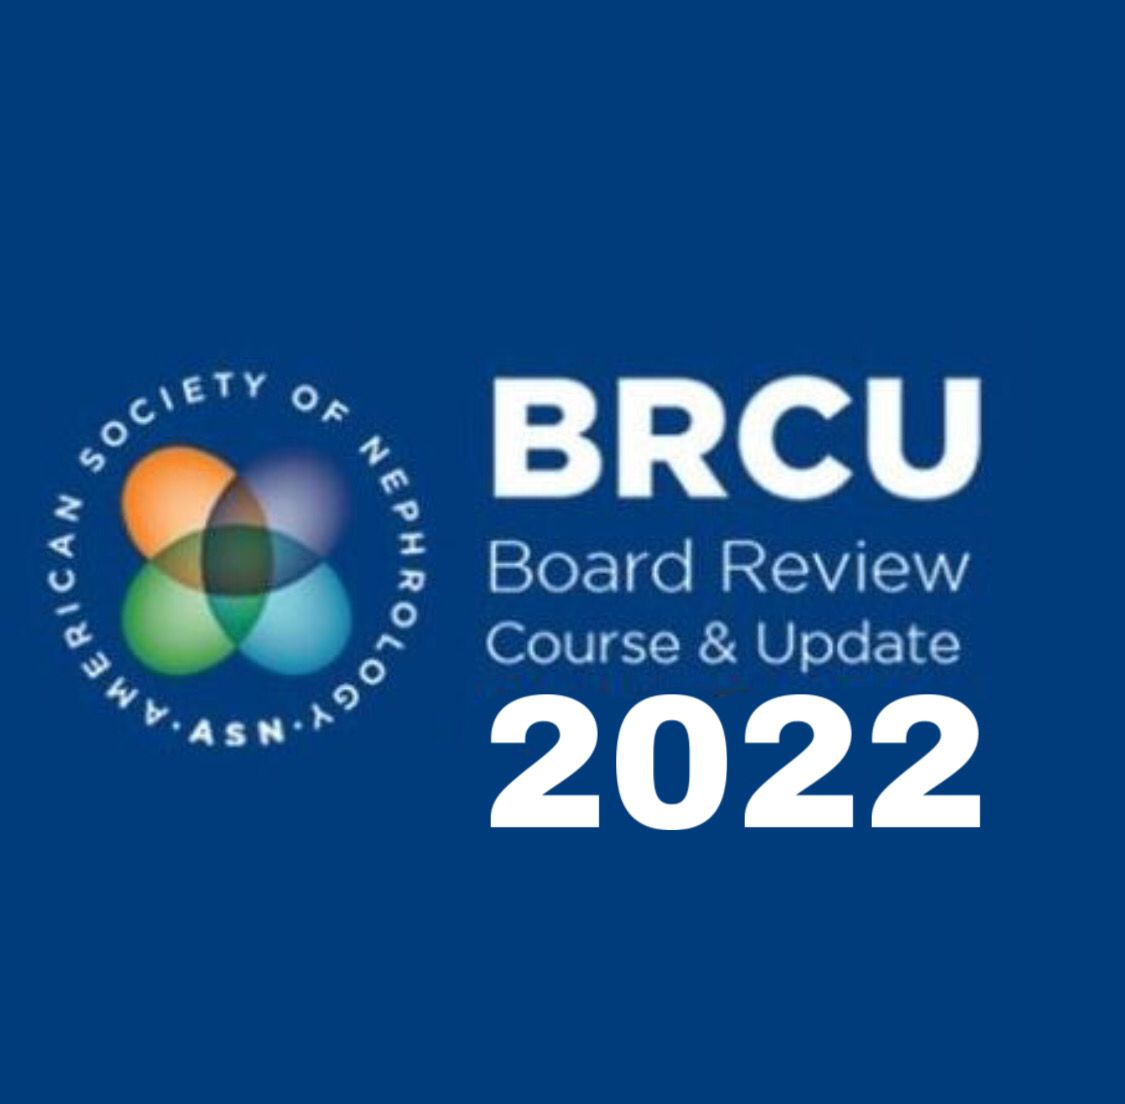 ASN : Board Review Course and Update Online 2022